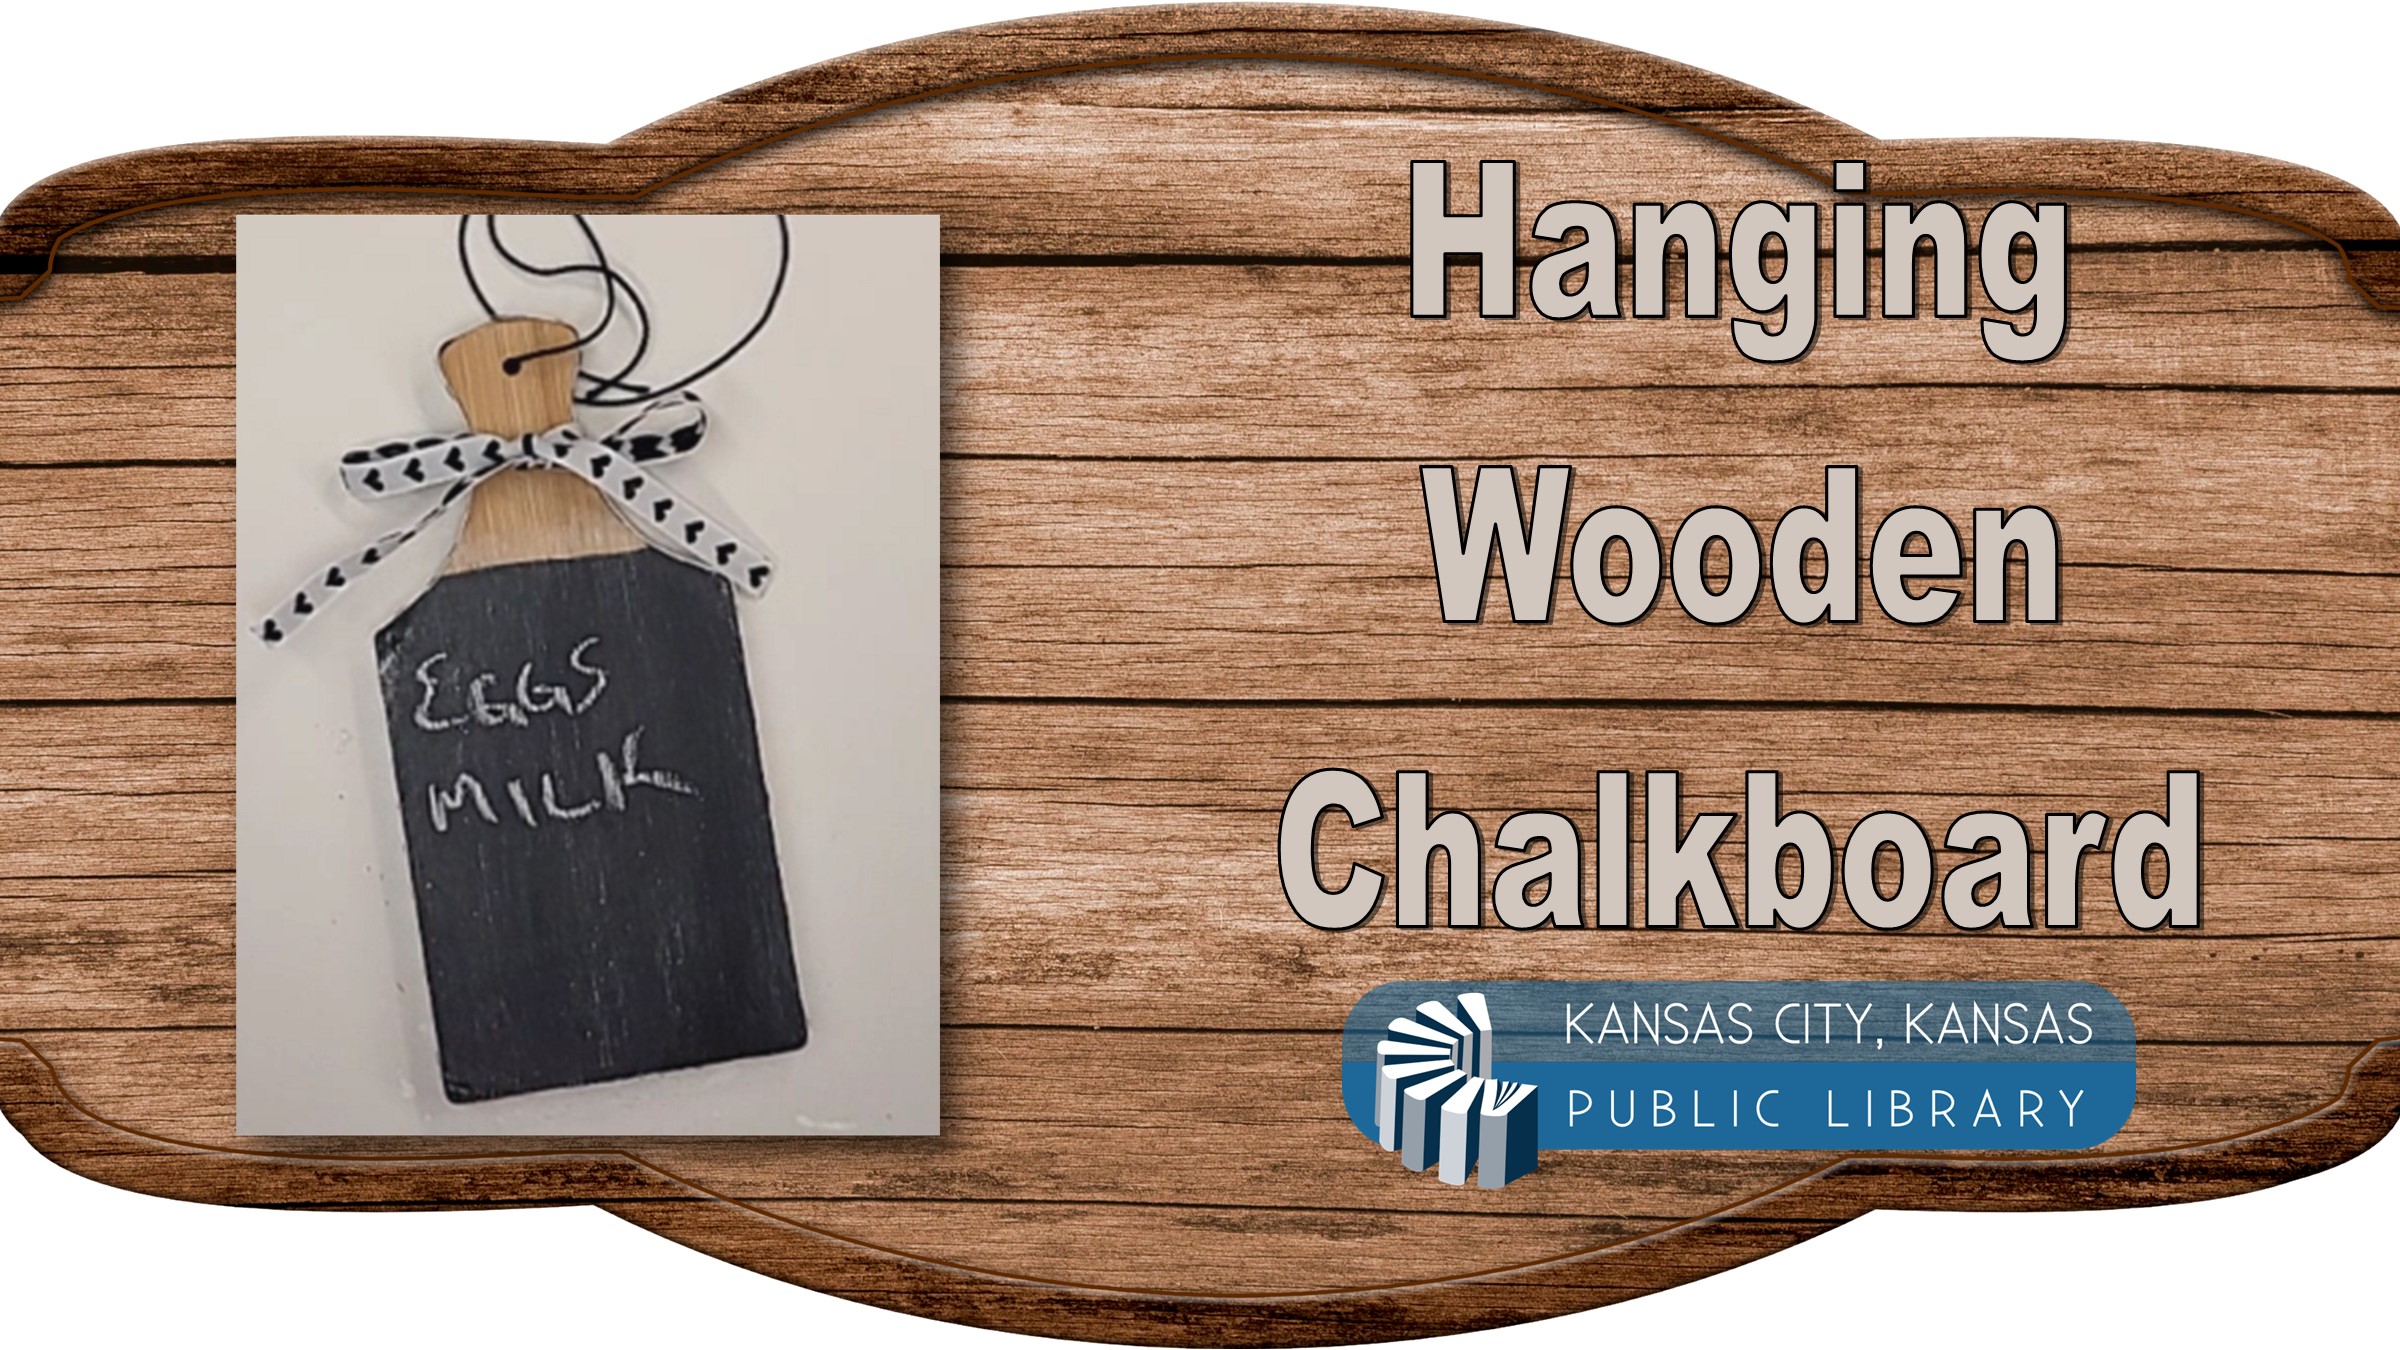 Hanging chalkboard on a wood background